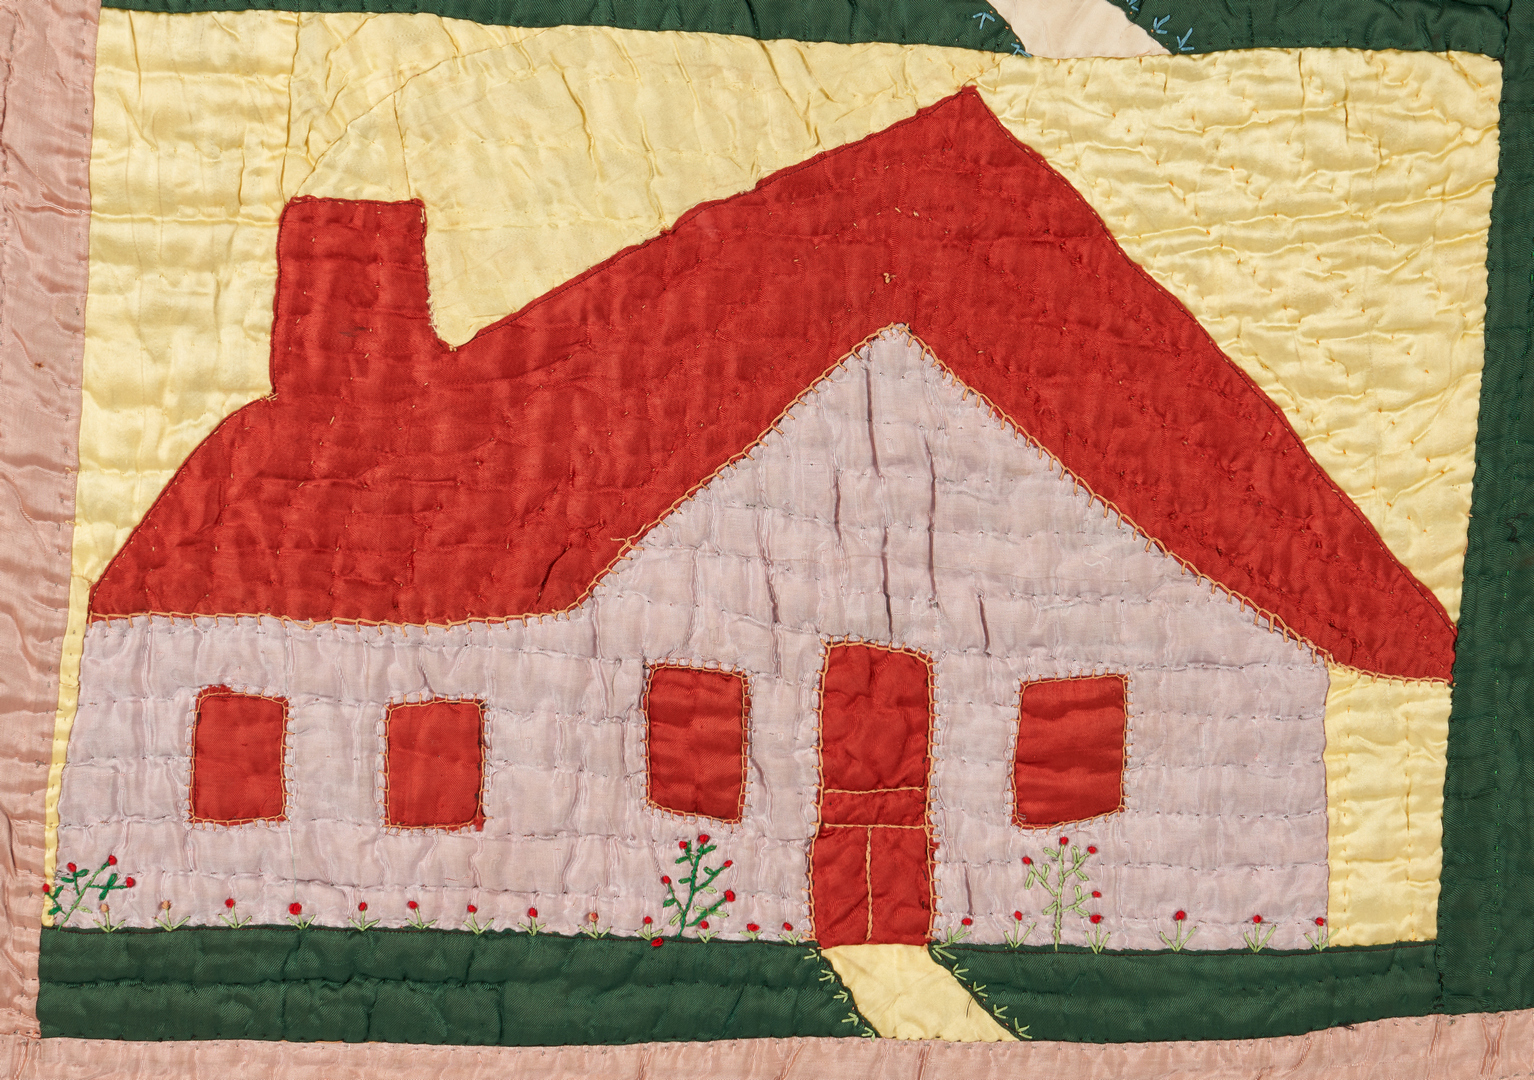 Lot 155: Exhibited African-American Schoolhouse Quilt